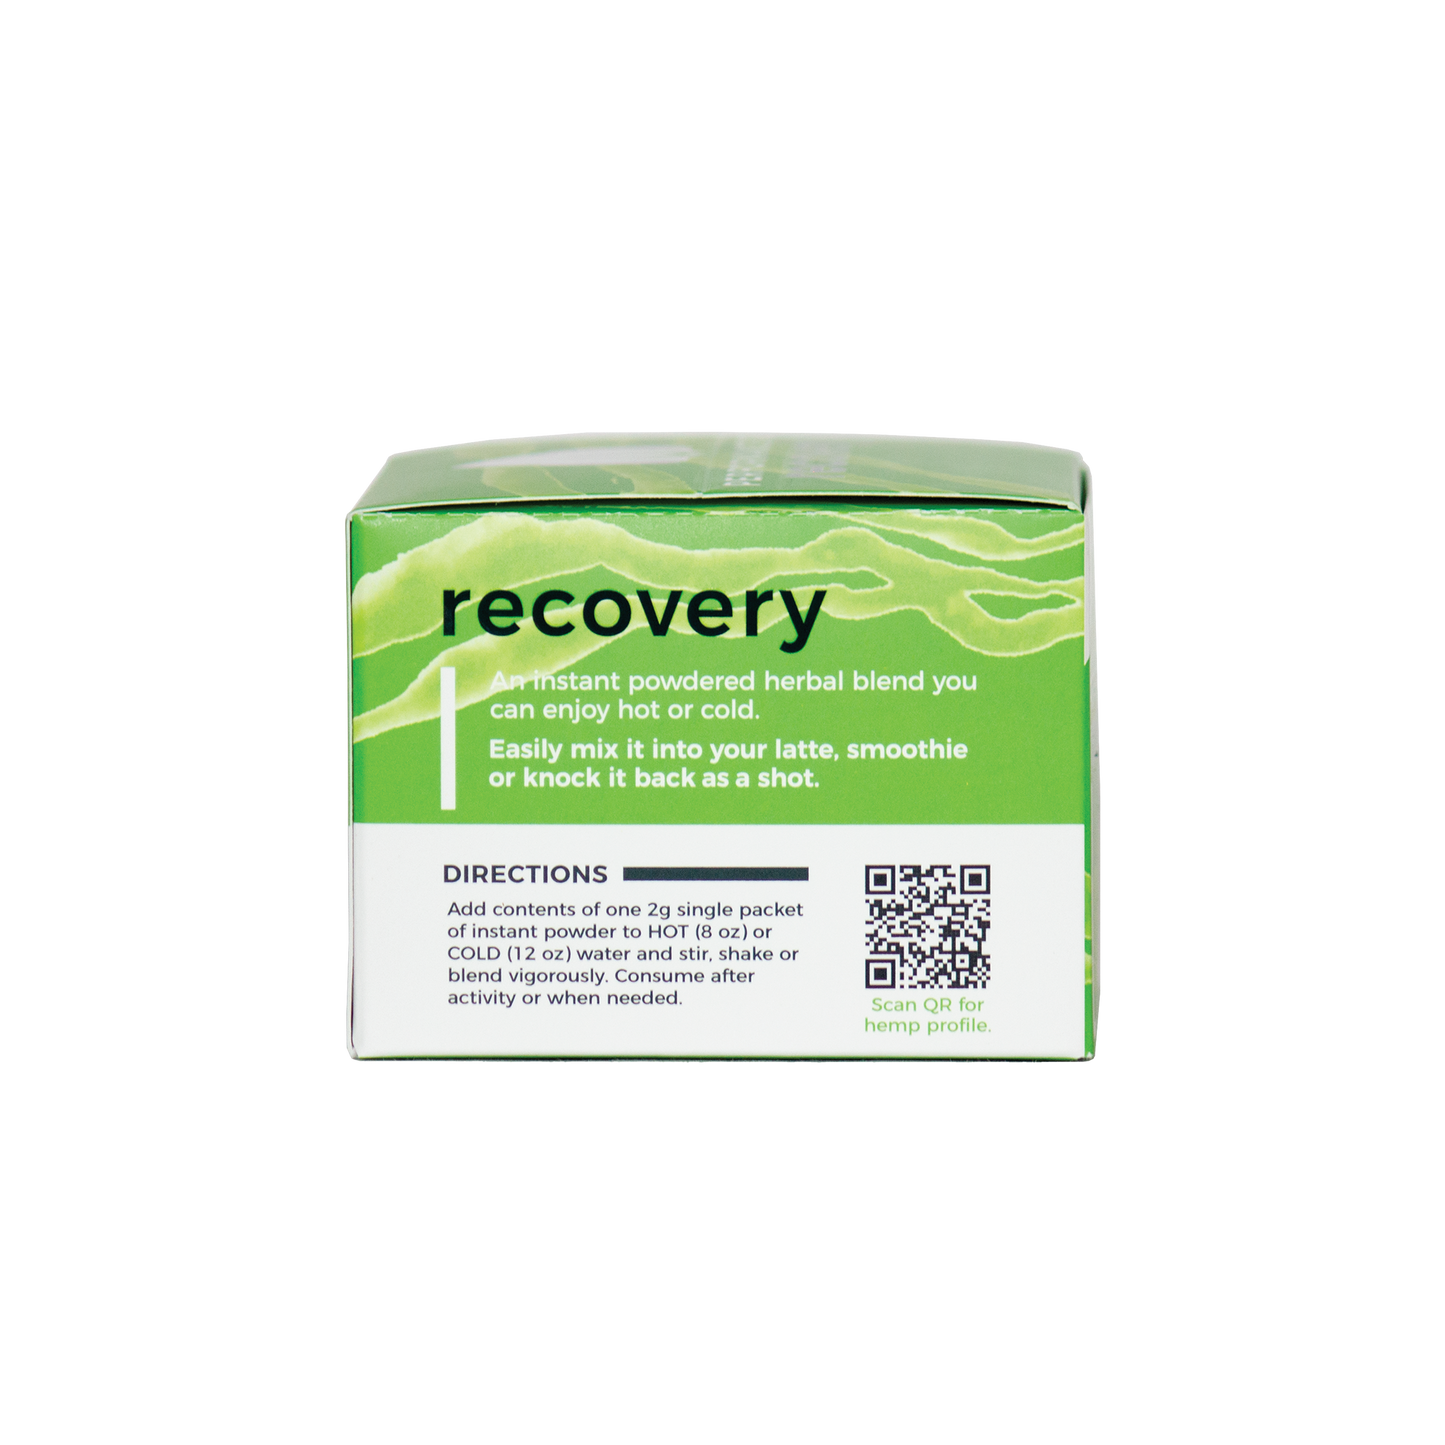 Performance Tea, Box of Recovery CBD Packets - 20mg, 10ct (a Beverage) made by Performance Tea sold at CBD Emporium